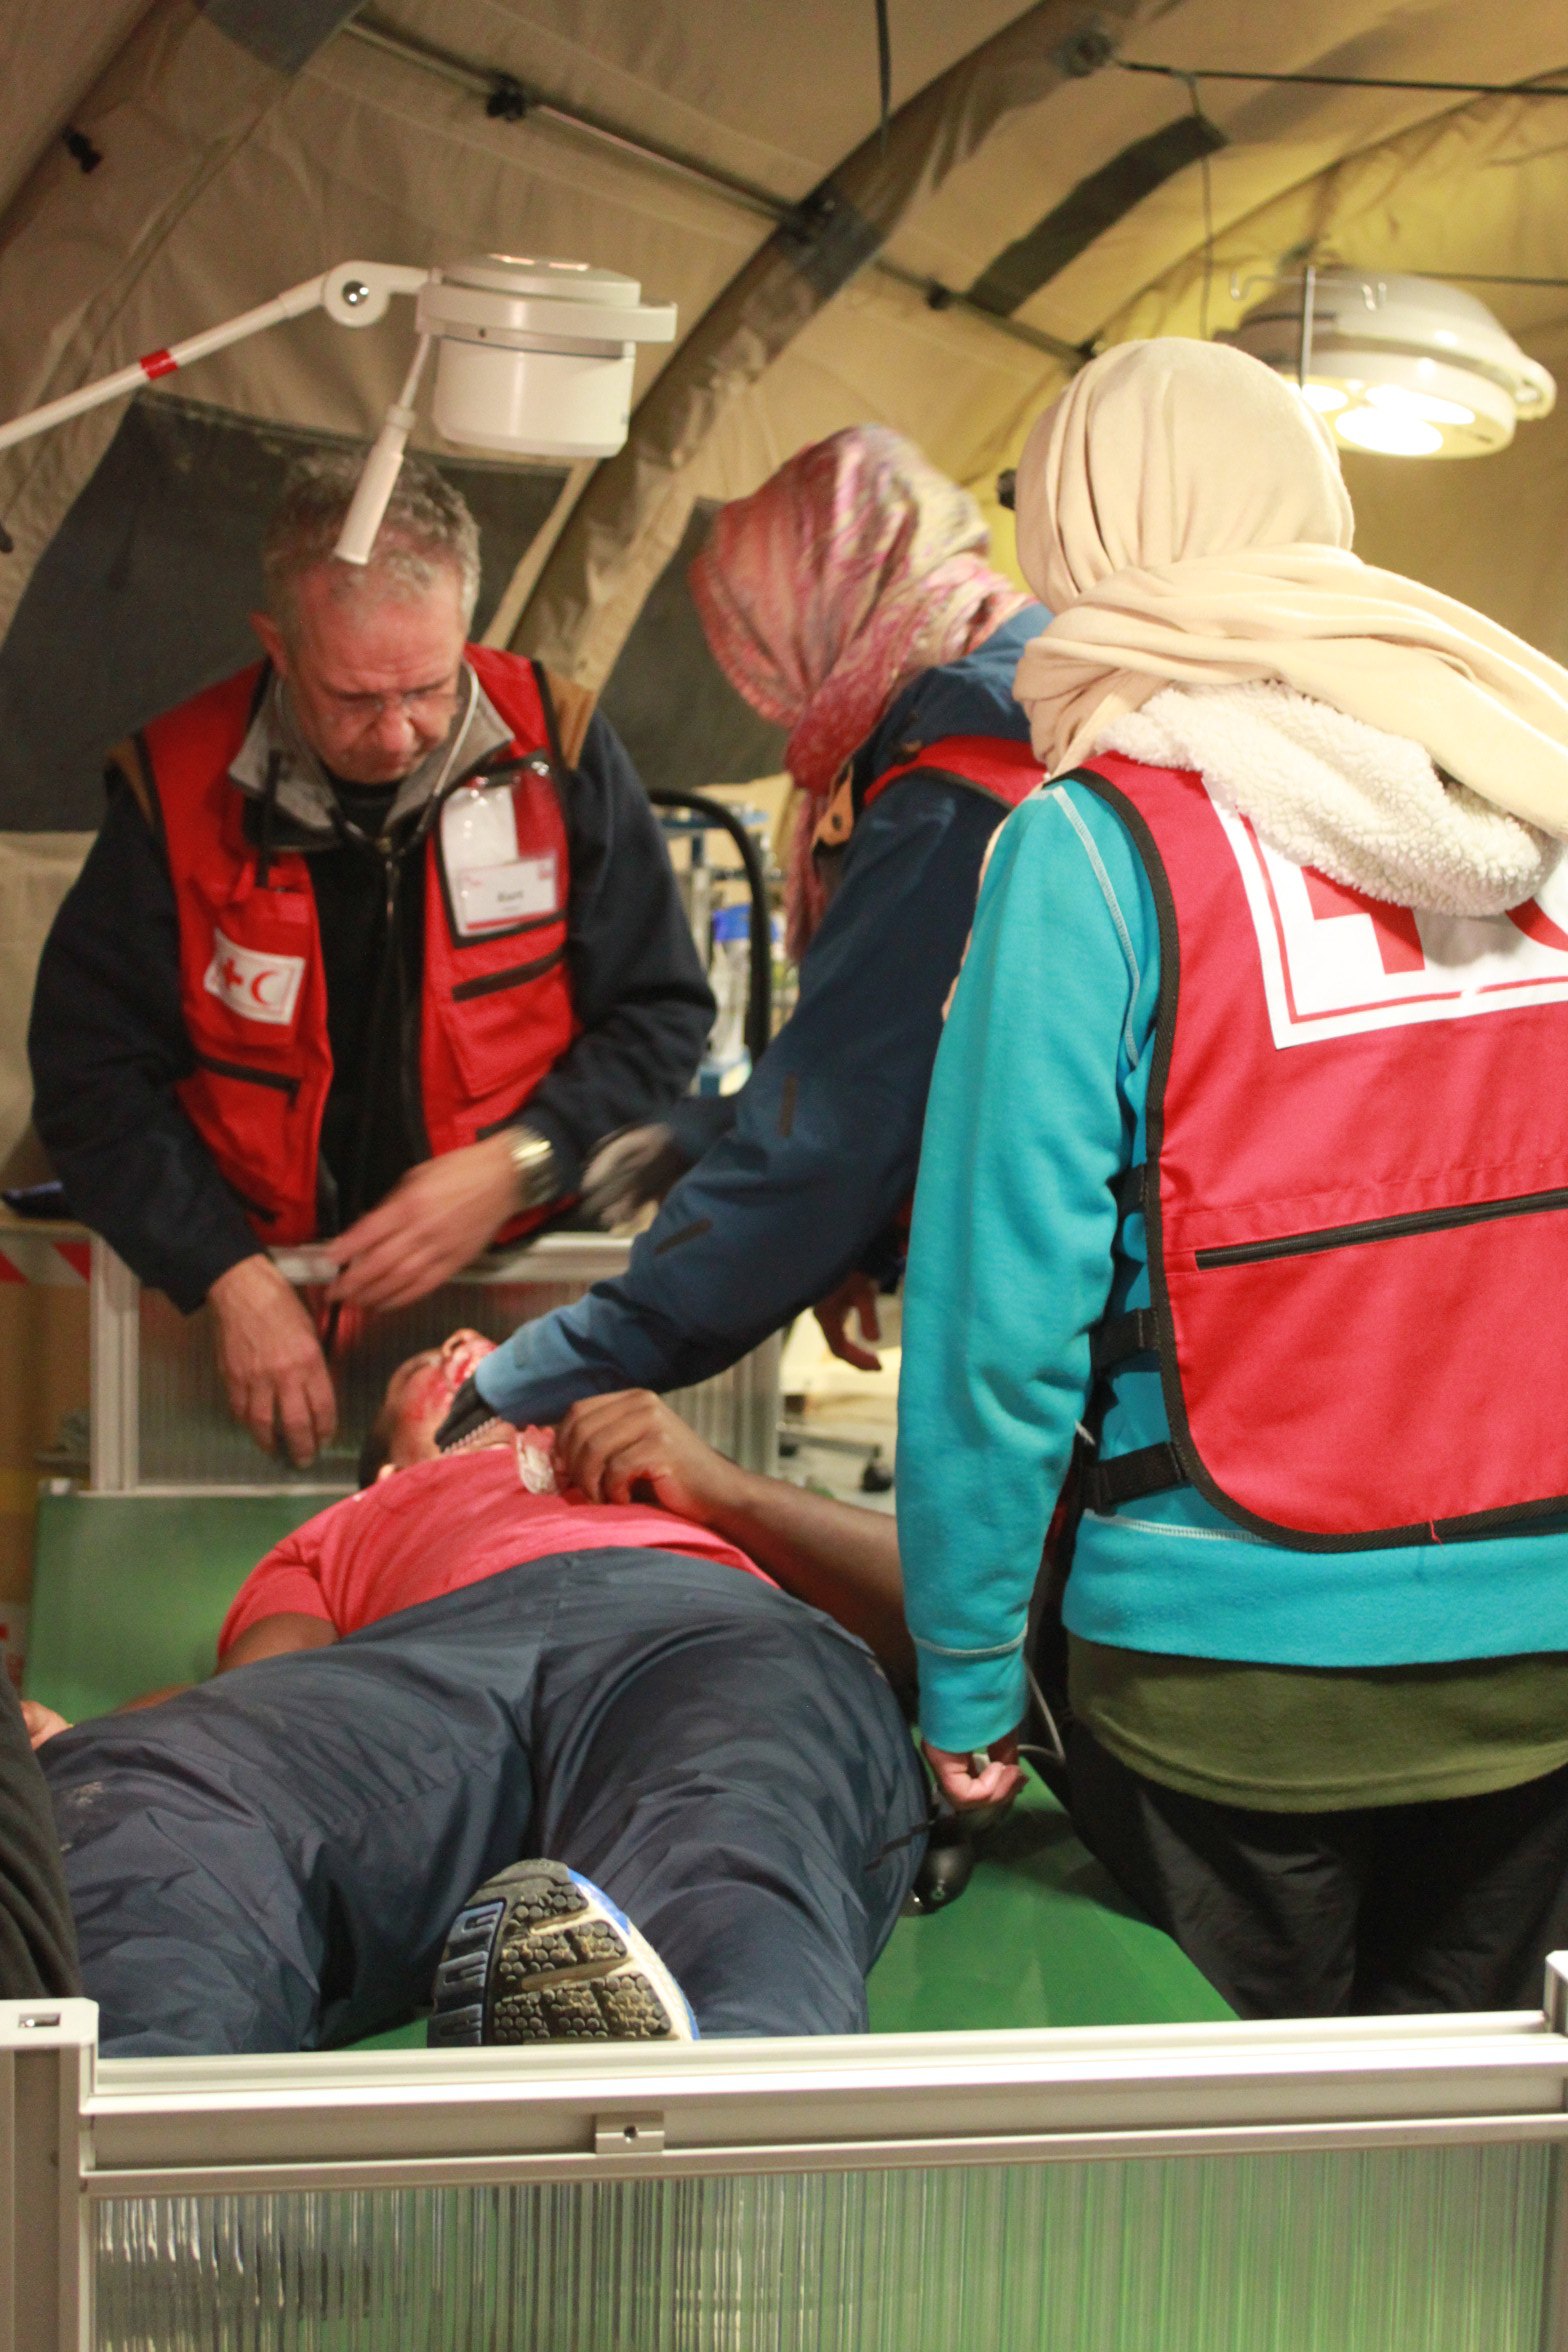 Casualties are treated in the operating room during ERU training